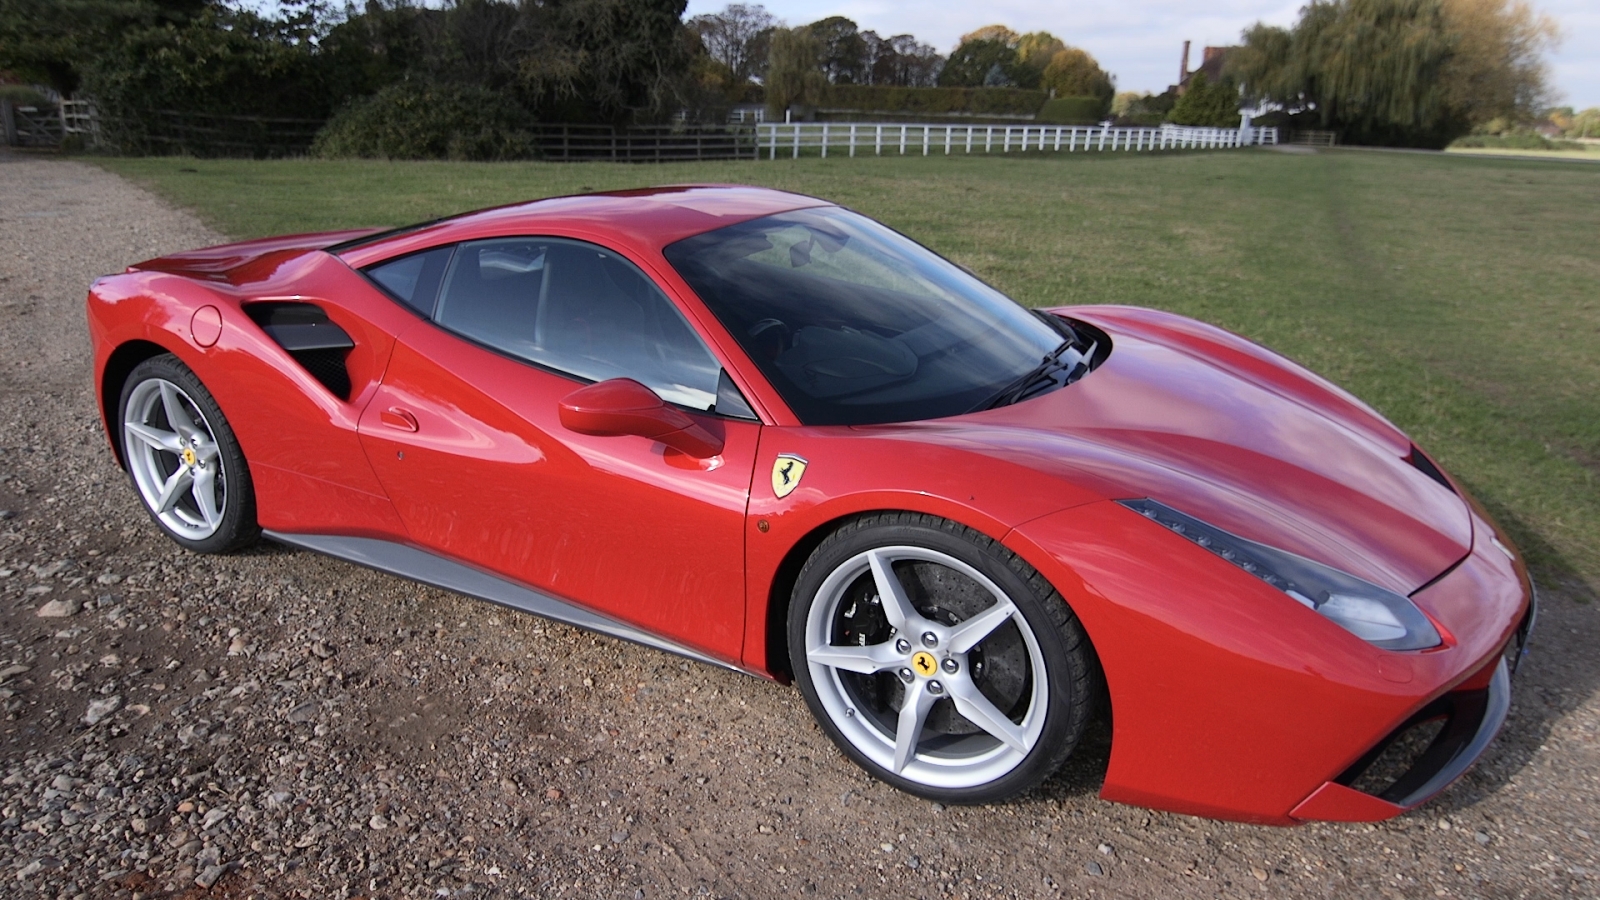 Ferrari 488 Gtb Review Is This Automotive Perfection